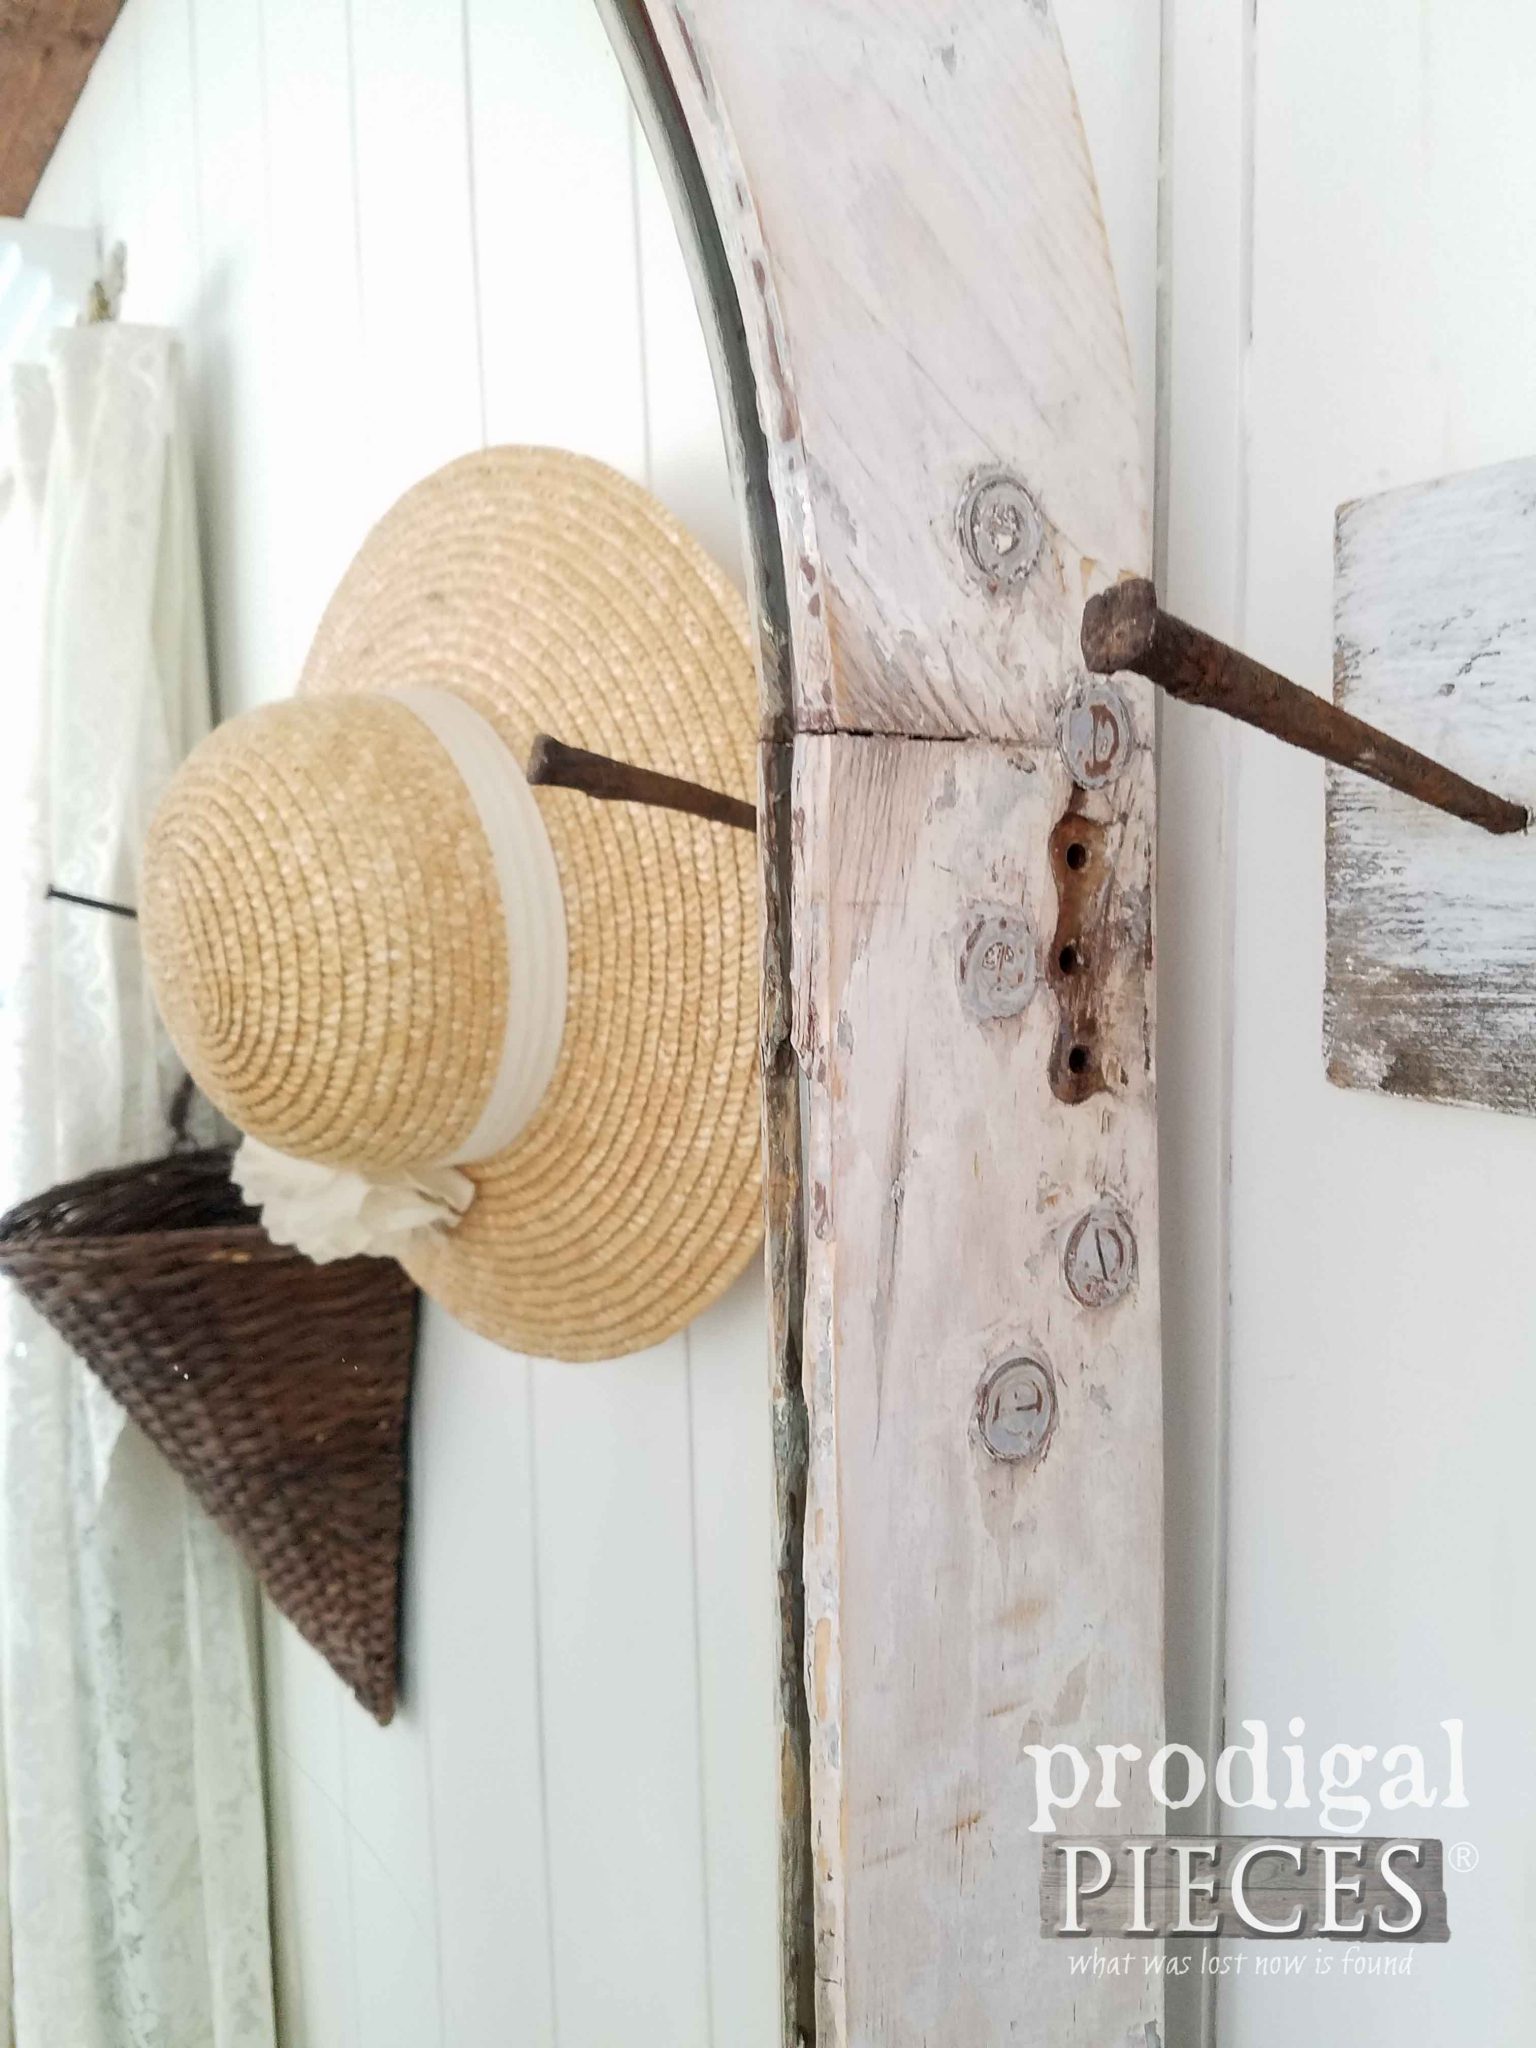 Old holes and chippy goodness on repurposed door mirror by Prodigal Pieces | prodigalpieces.com